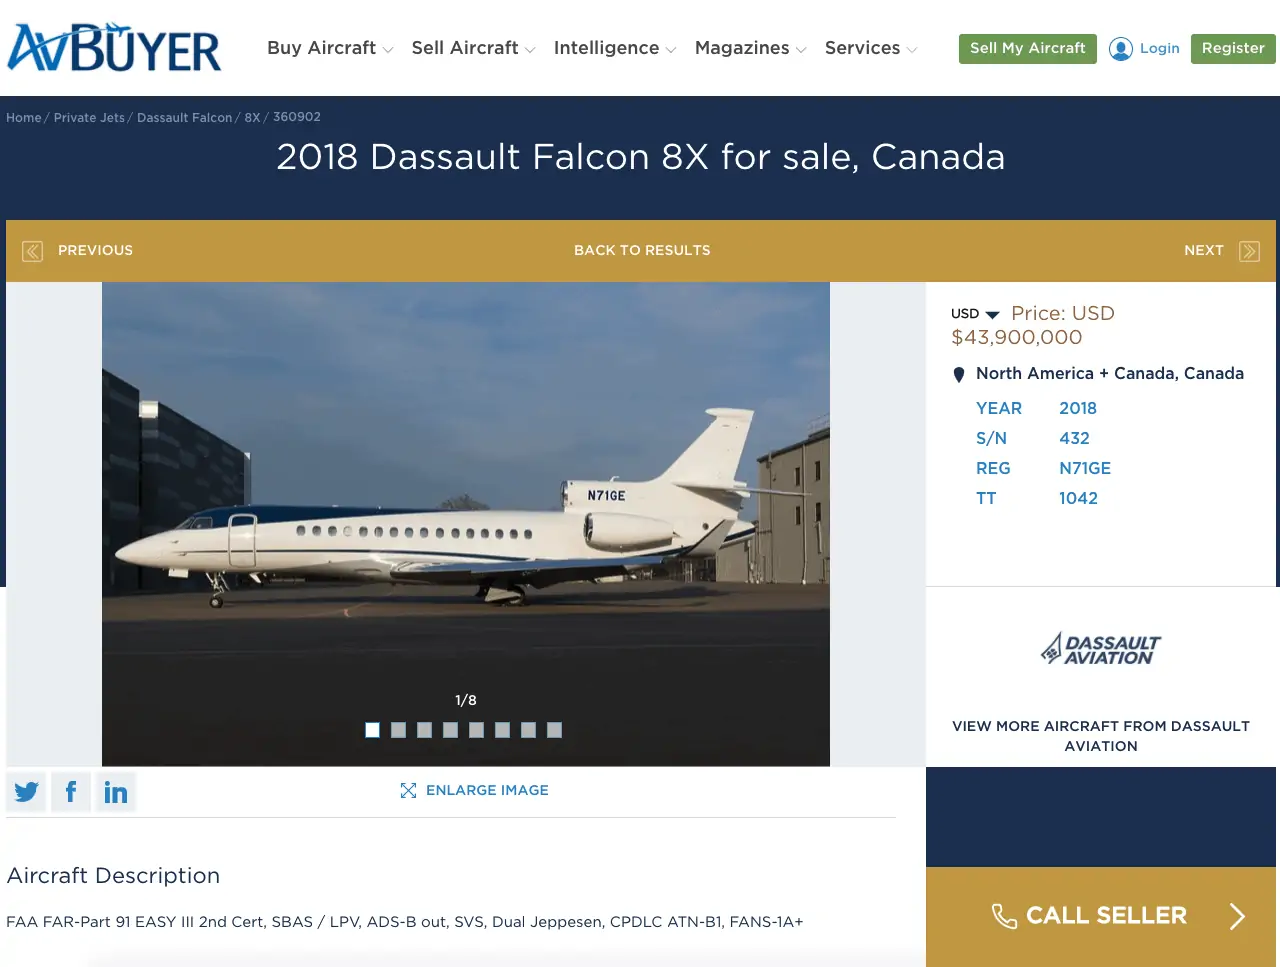 Dassault Falcon 8X for sale on AVBuyer - purchasing a private jet